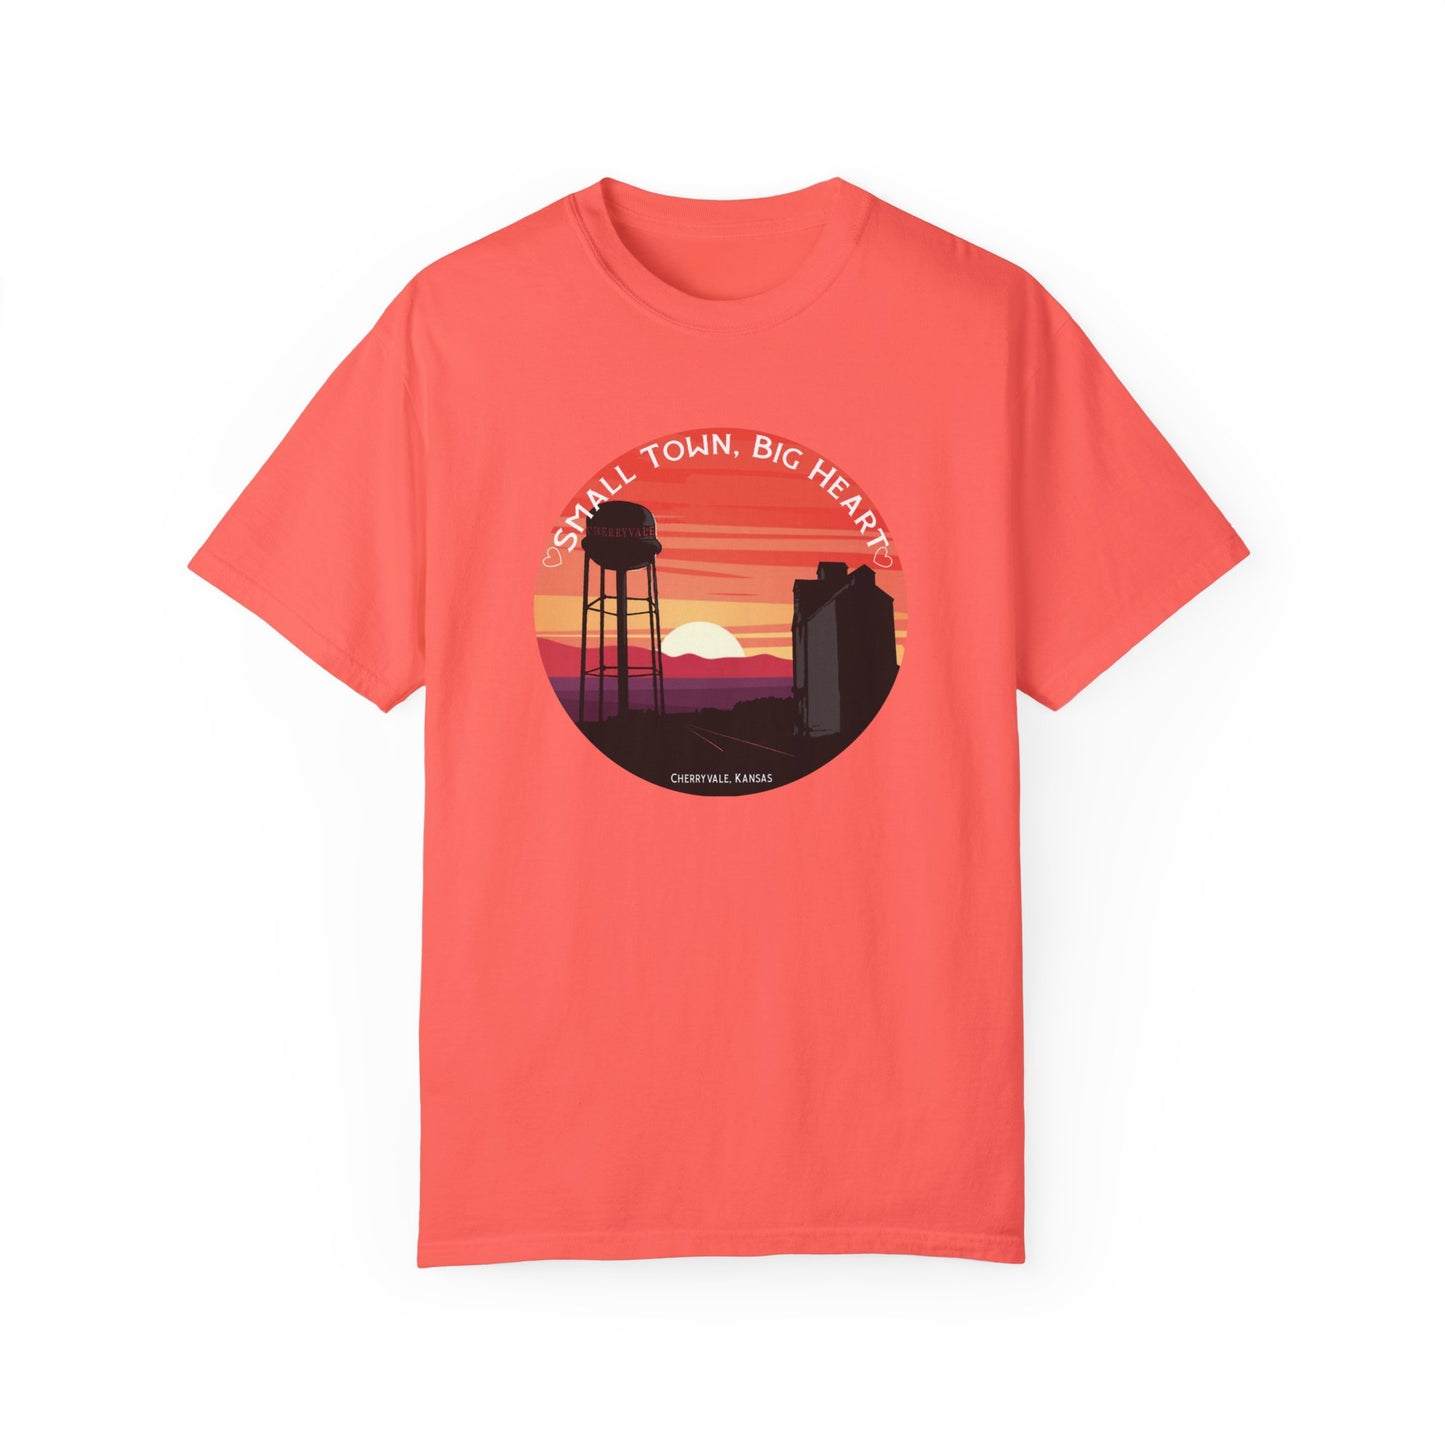 HEARTS Version - Small Town, Big Heart - Short Sleeve on Comfort Colors